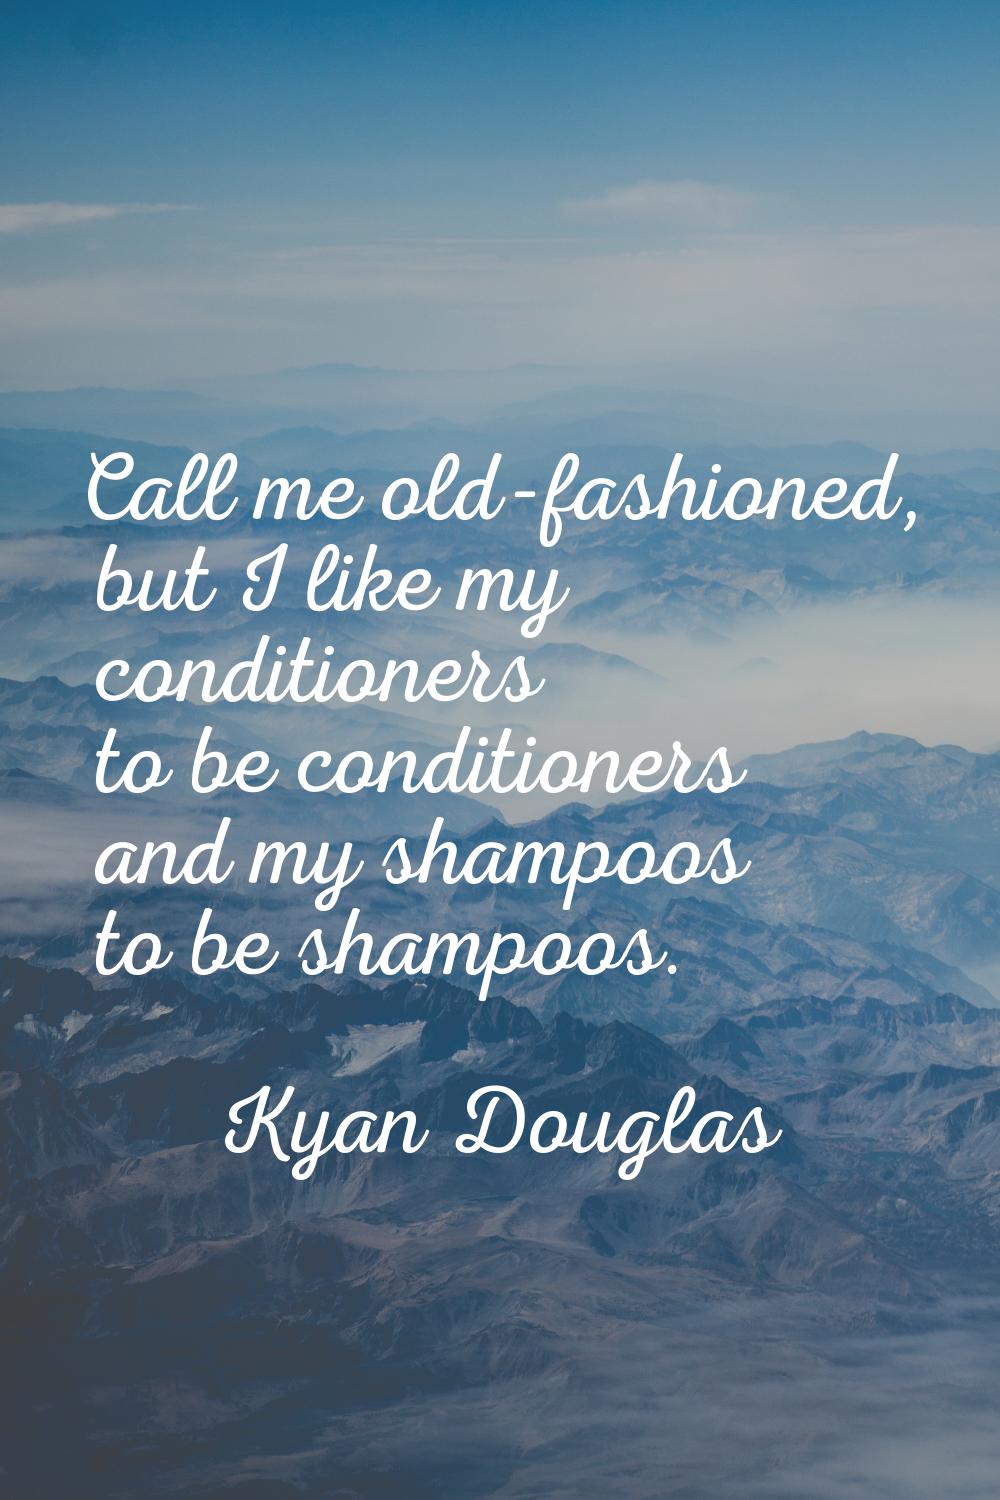 Call me old-fashioned, but I like my conditioners to be conditioners and my shampoos to be shampoos